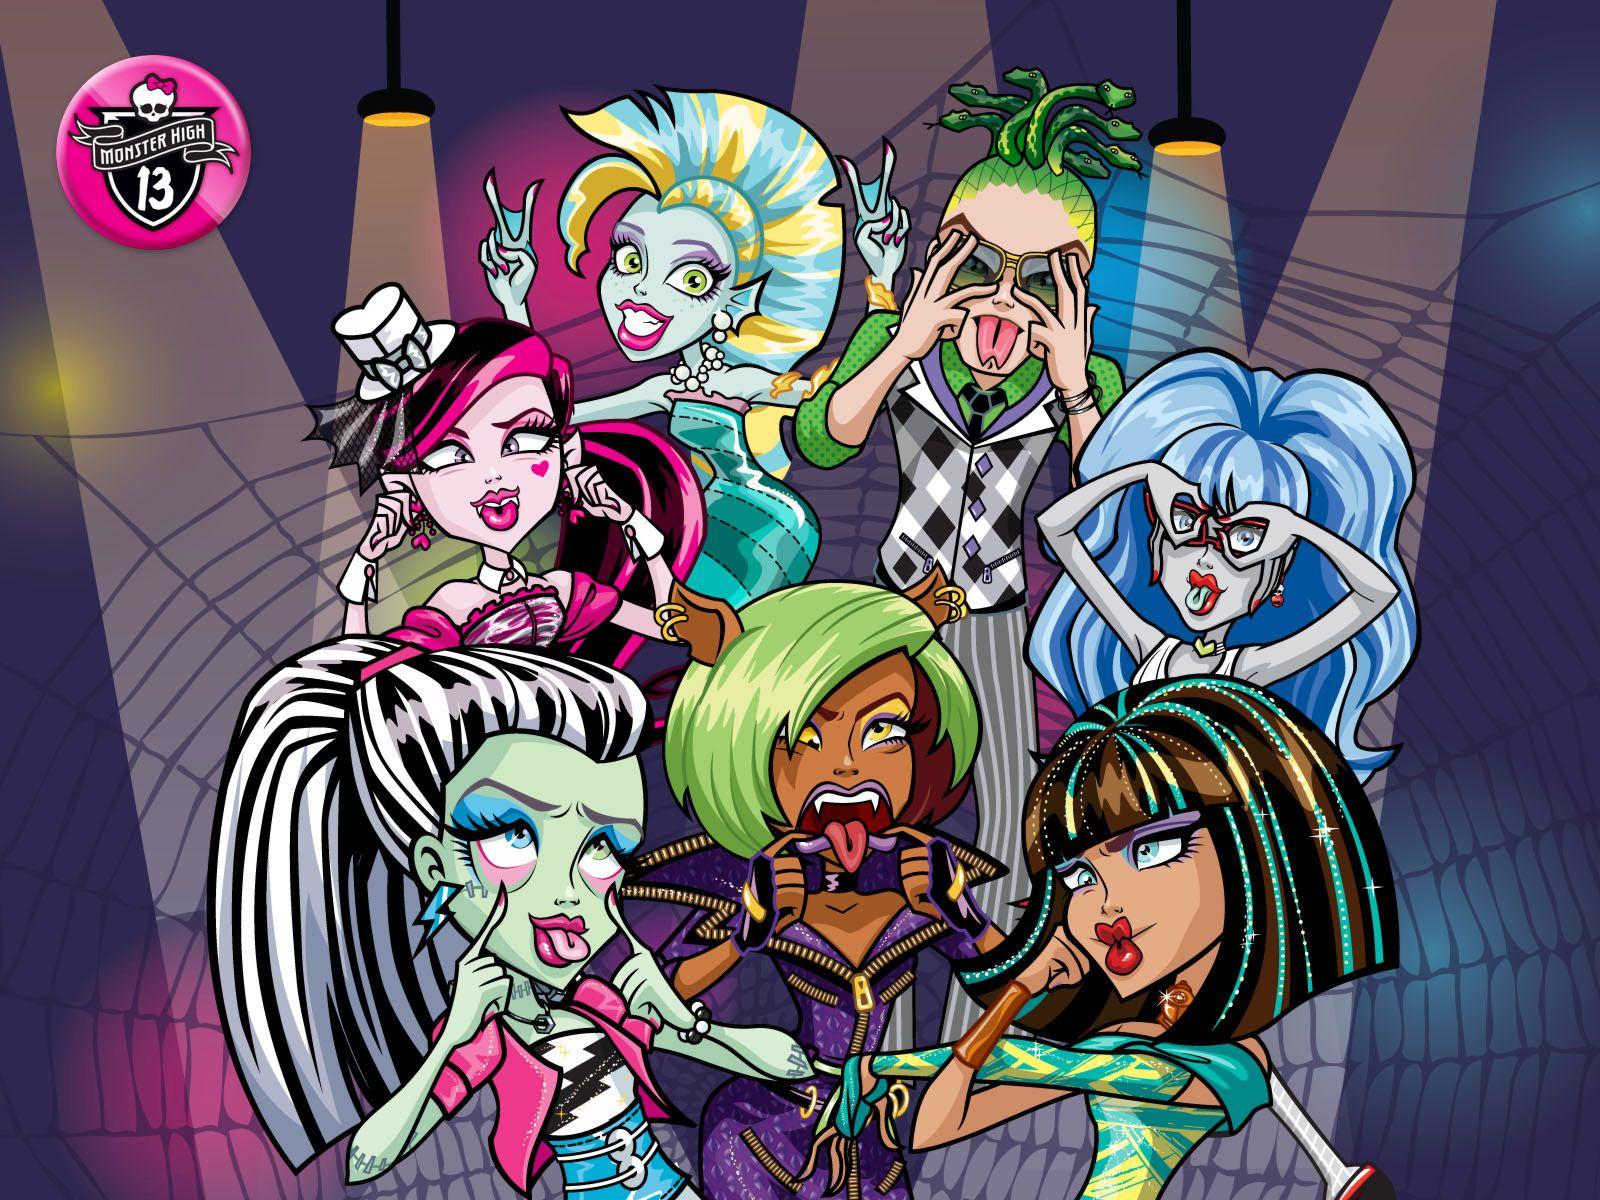 Monster High Wallpapers Screensavers, Adorable HDQ Backgrounds of